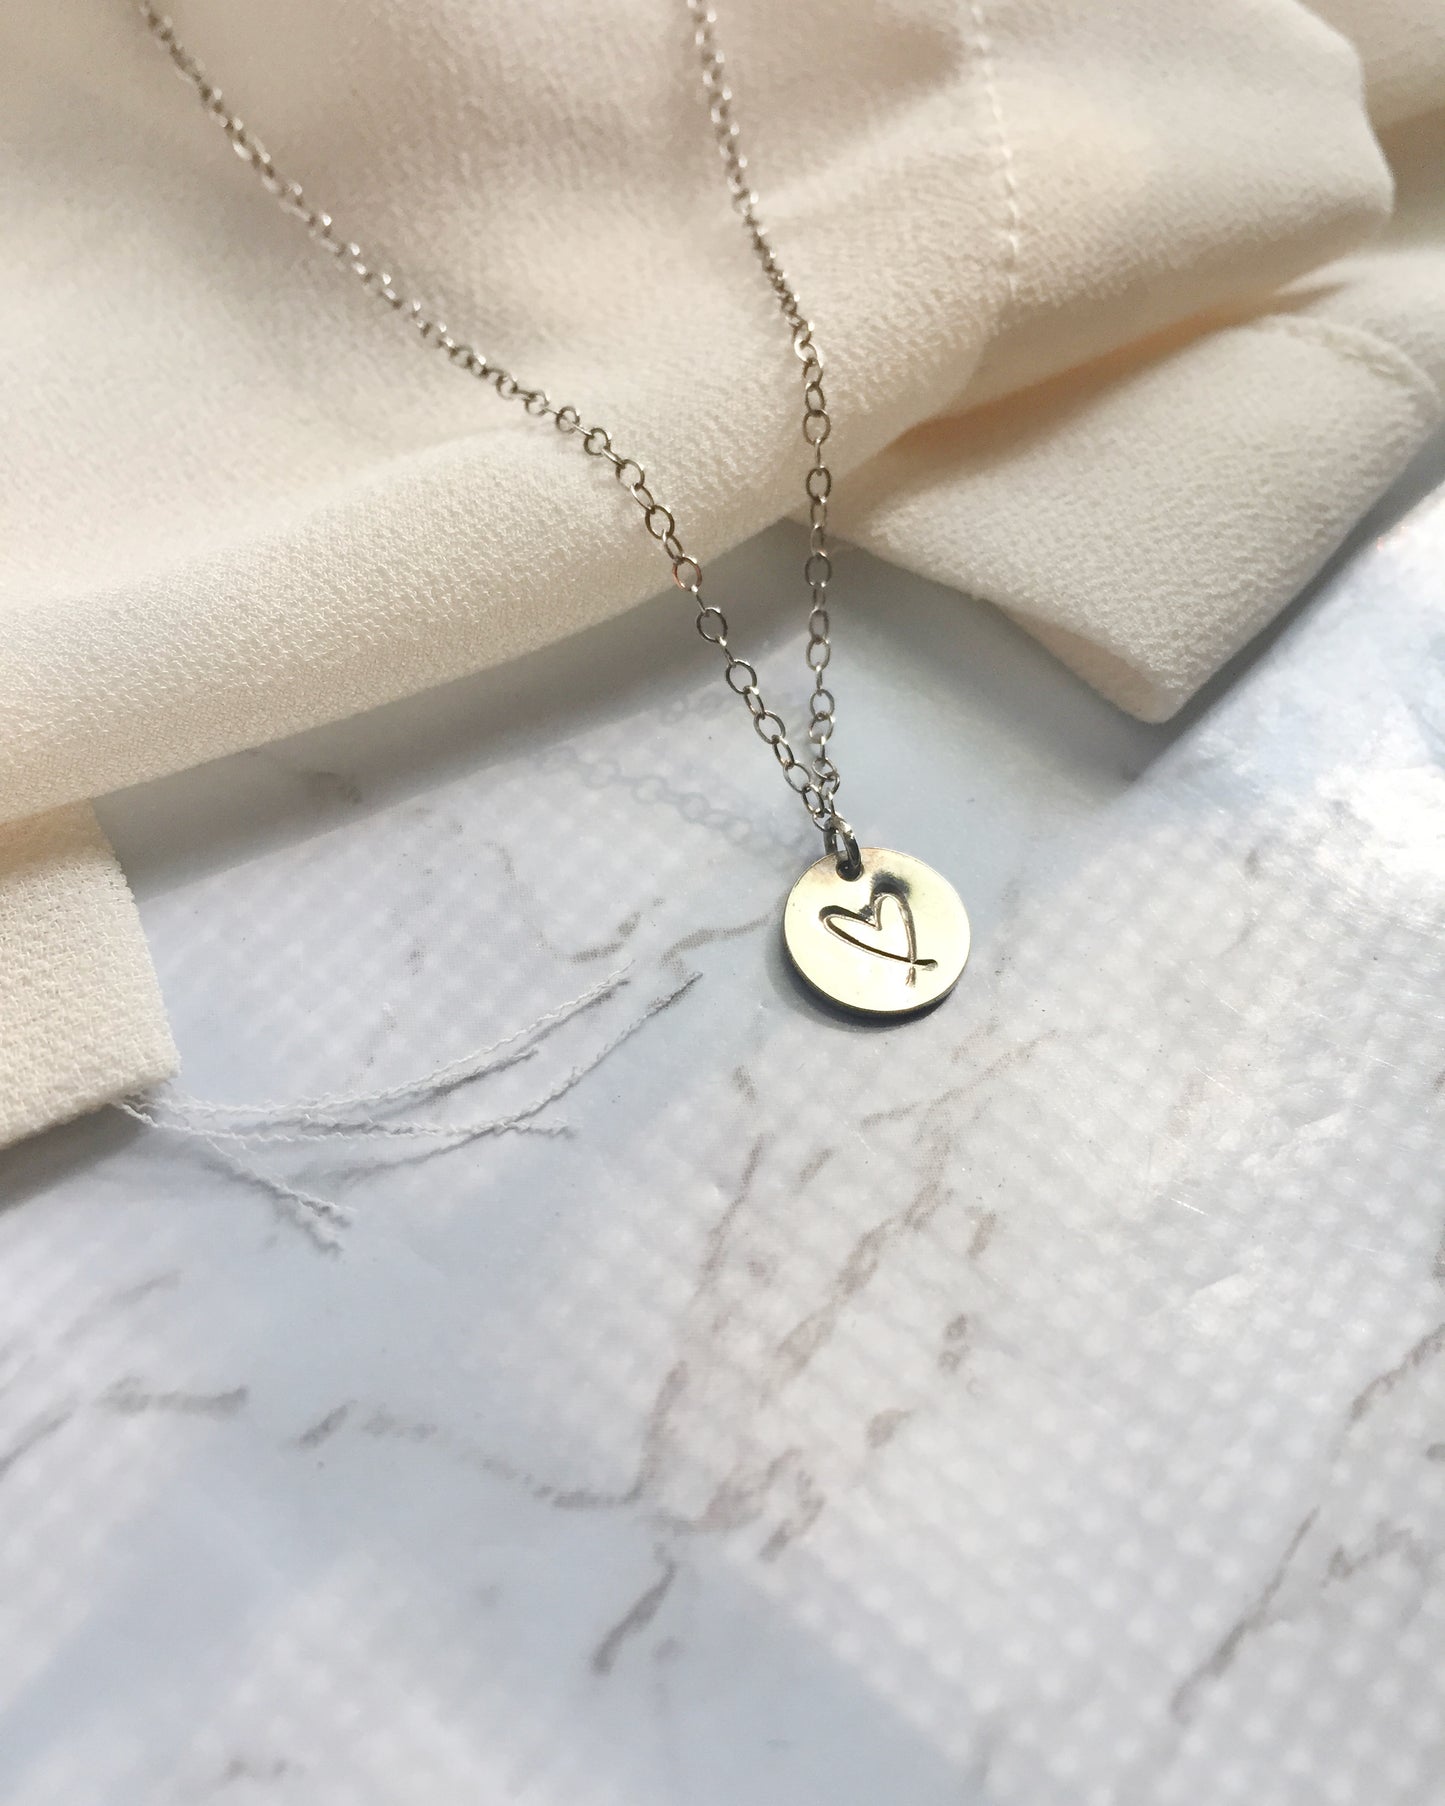 Delicate Mom Necklace | Dainty Heart Necklace For Mom | Meaningful Jewelry For Mom | Sentimental Mom Gift | IB Jewelry